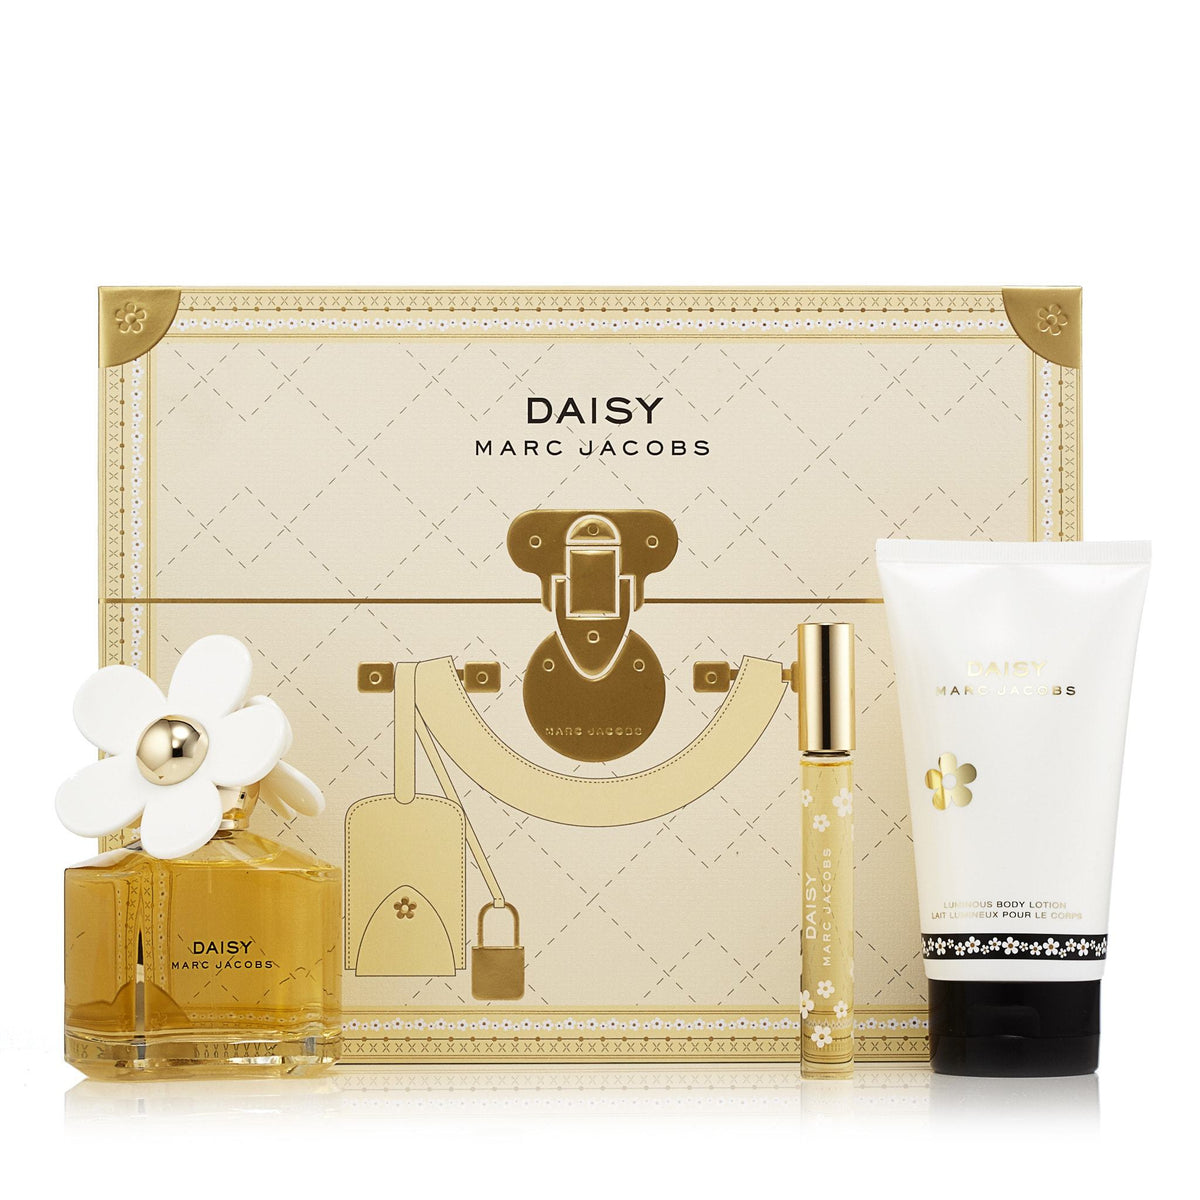 Daisy Gift Set for Women by Marc Jacobs 3.4 oz.